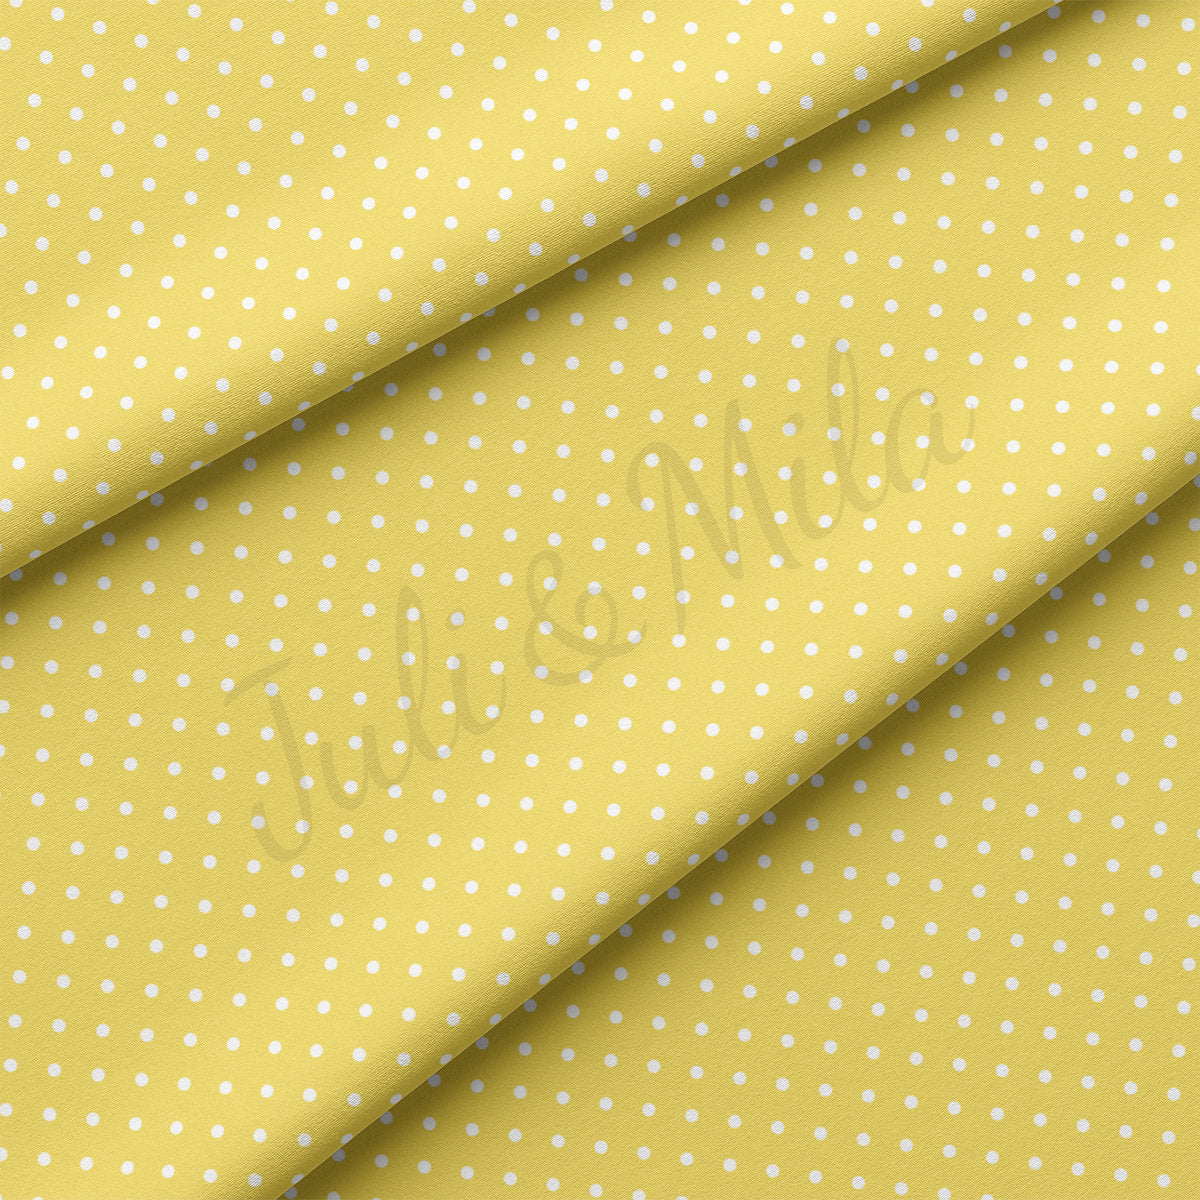 DBP Fabric Double Brushed Polyester DBP2390